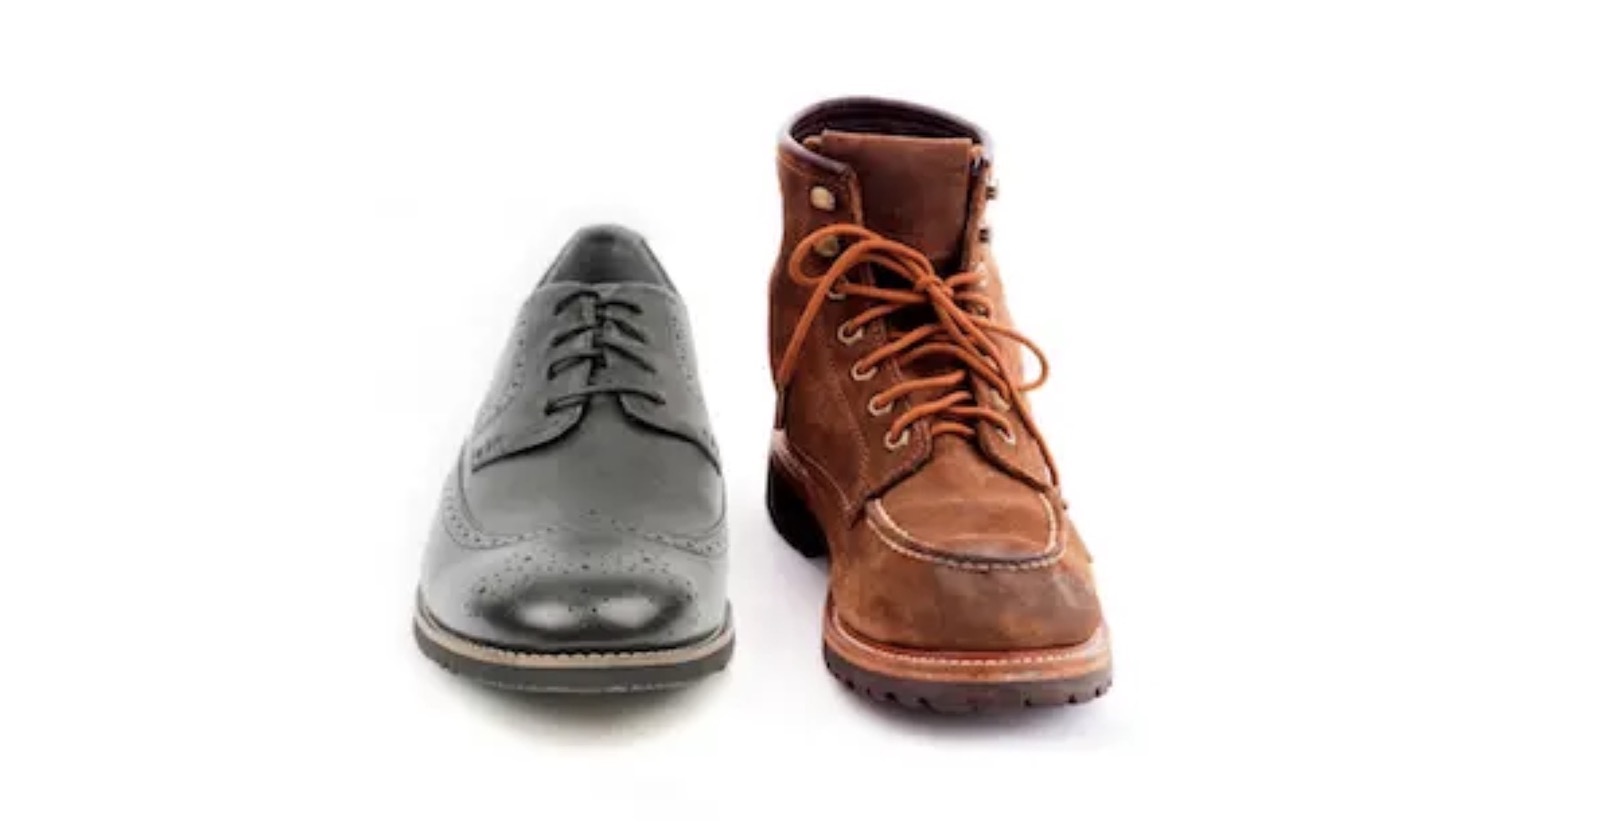 Dress shoe for office next to work boot for the construction jobsite